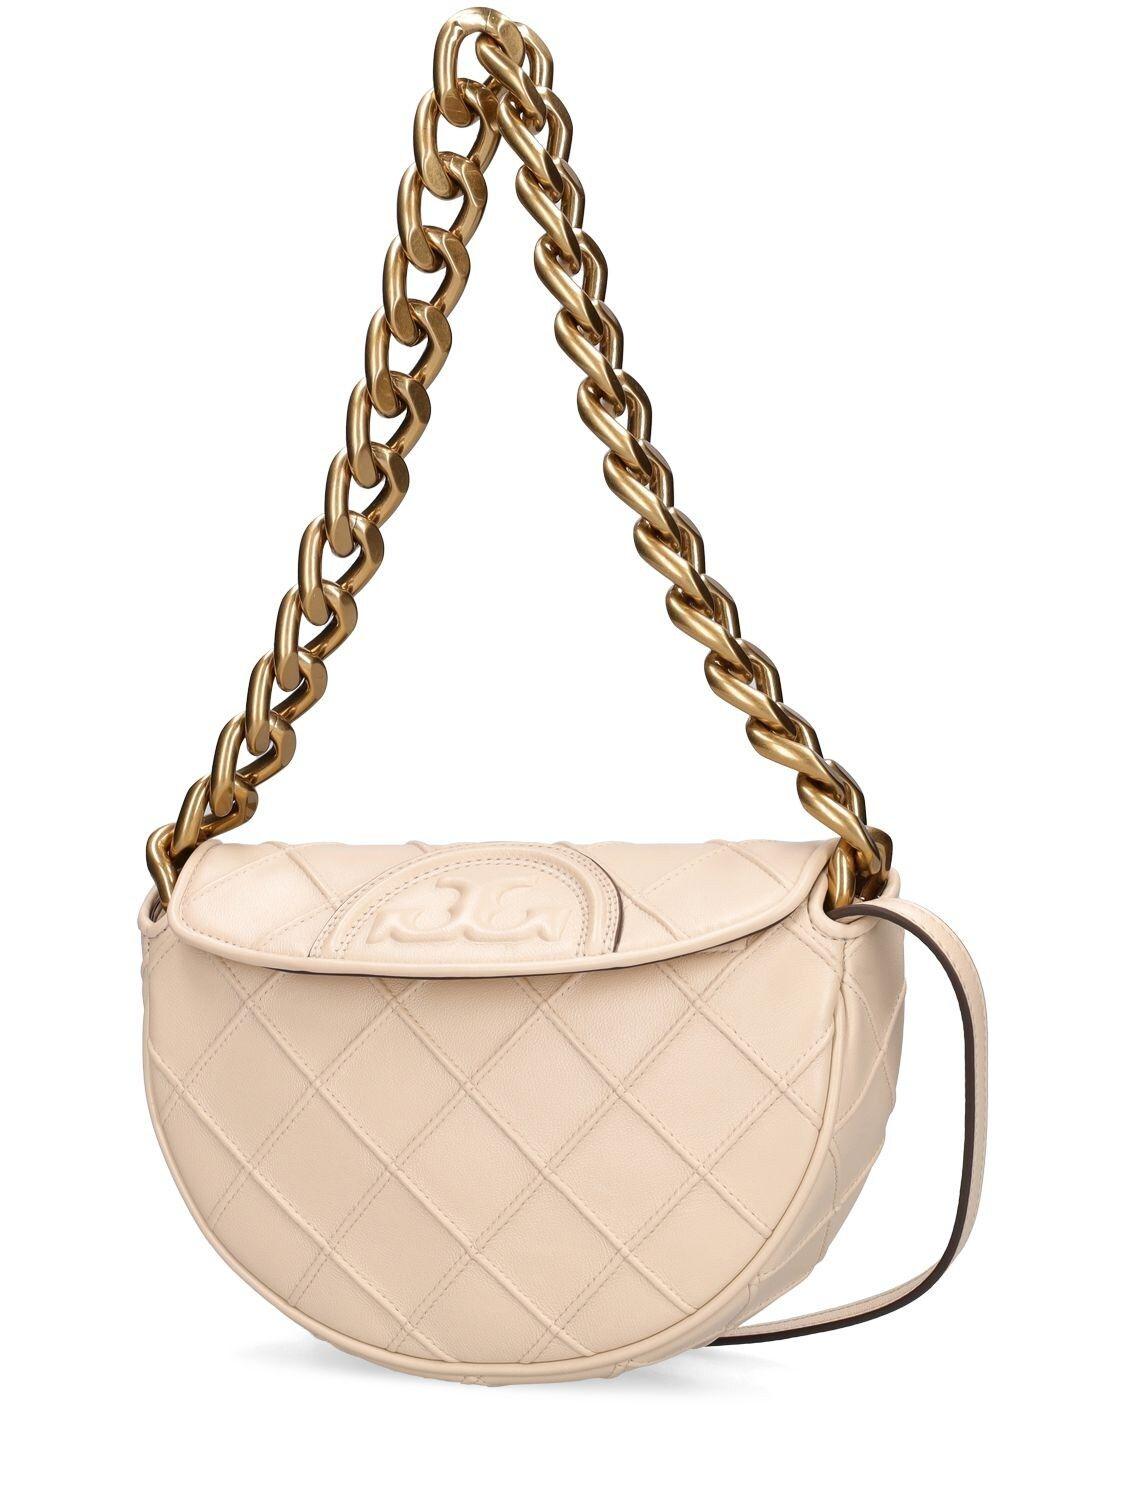 Tory Burch Mini Fleming Soft Crescent Leather Bag in Natural